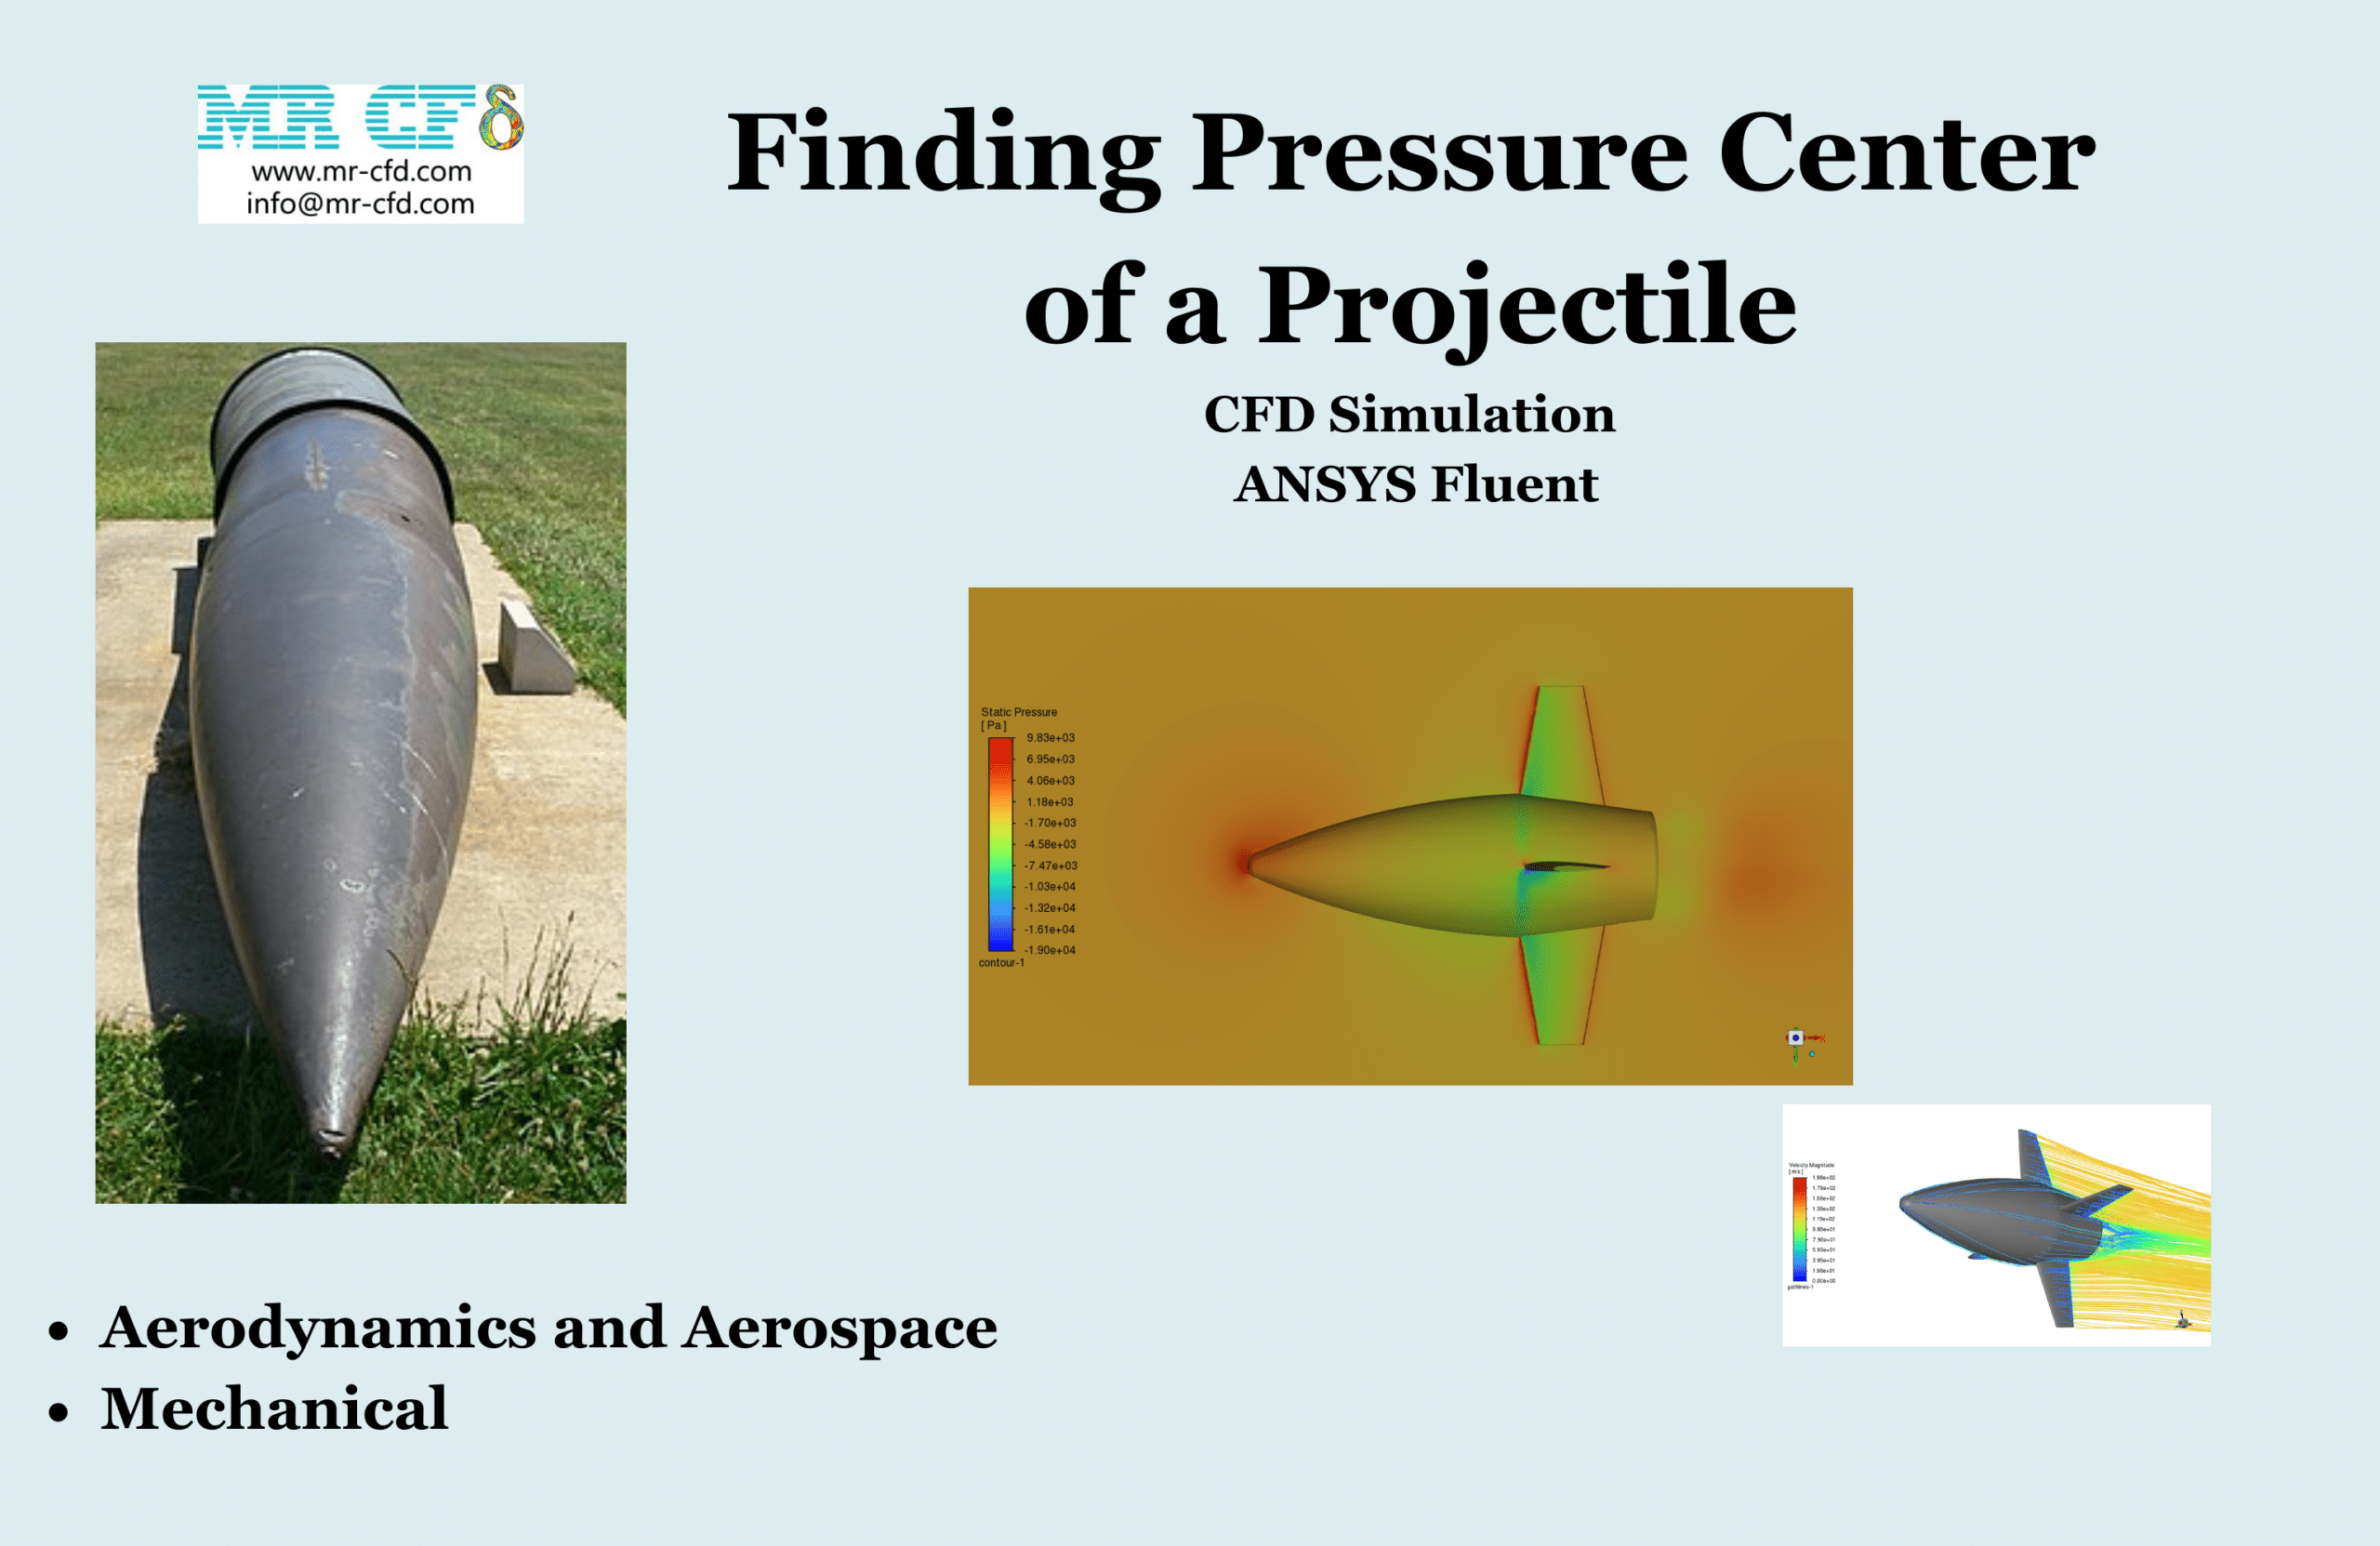 Finding Pressure Center of a Projectile CFD Simulation, ANSYS Fluent